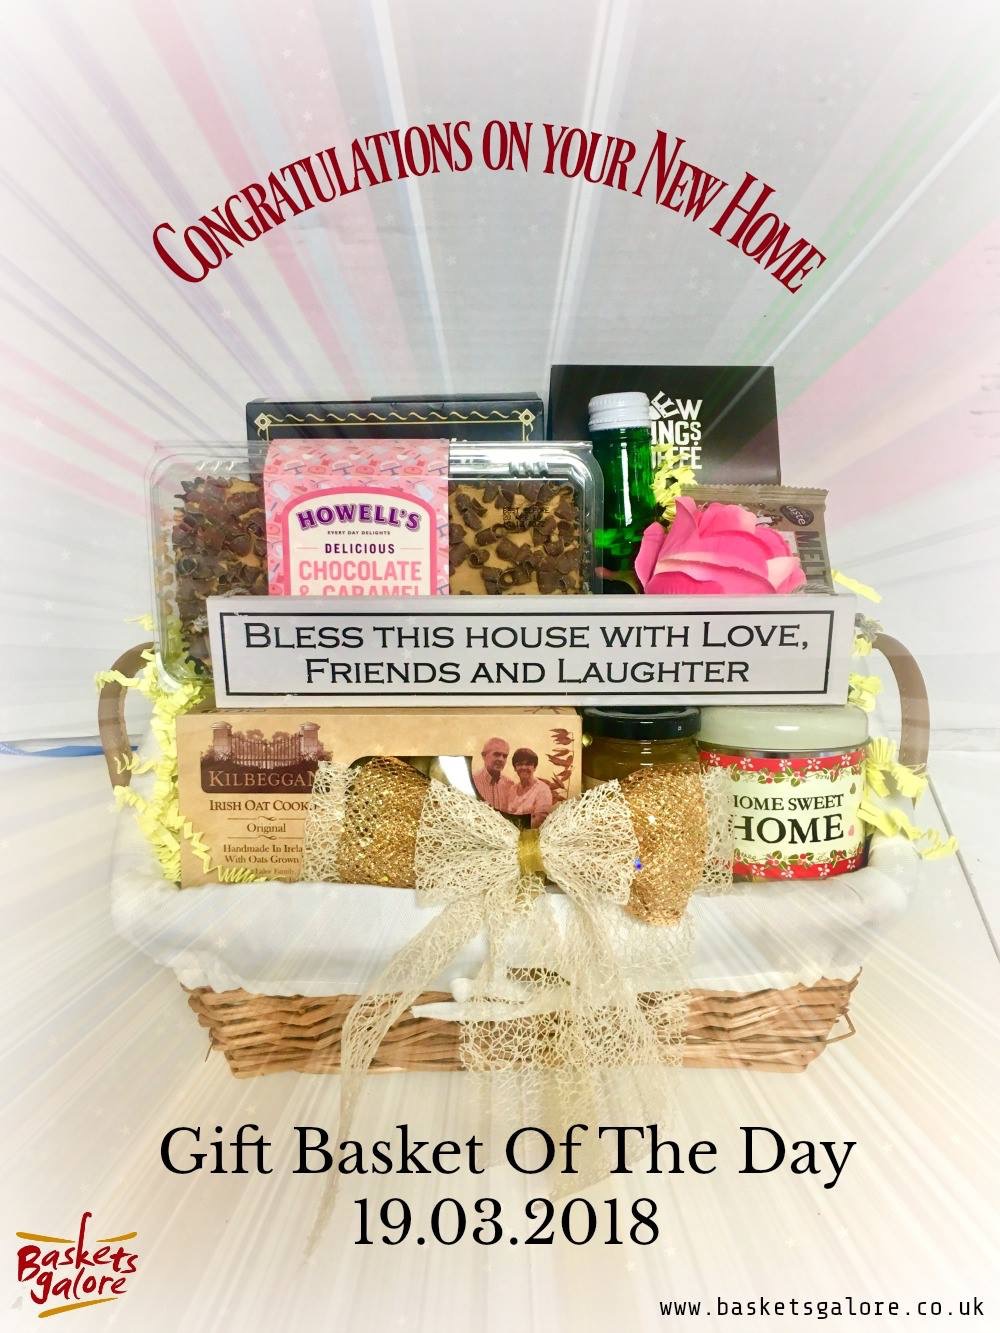 Baskets Galore’s Customer Gifts – Gift Basket of the Day 19.03.18